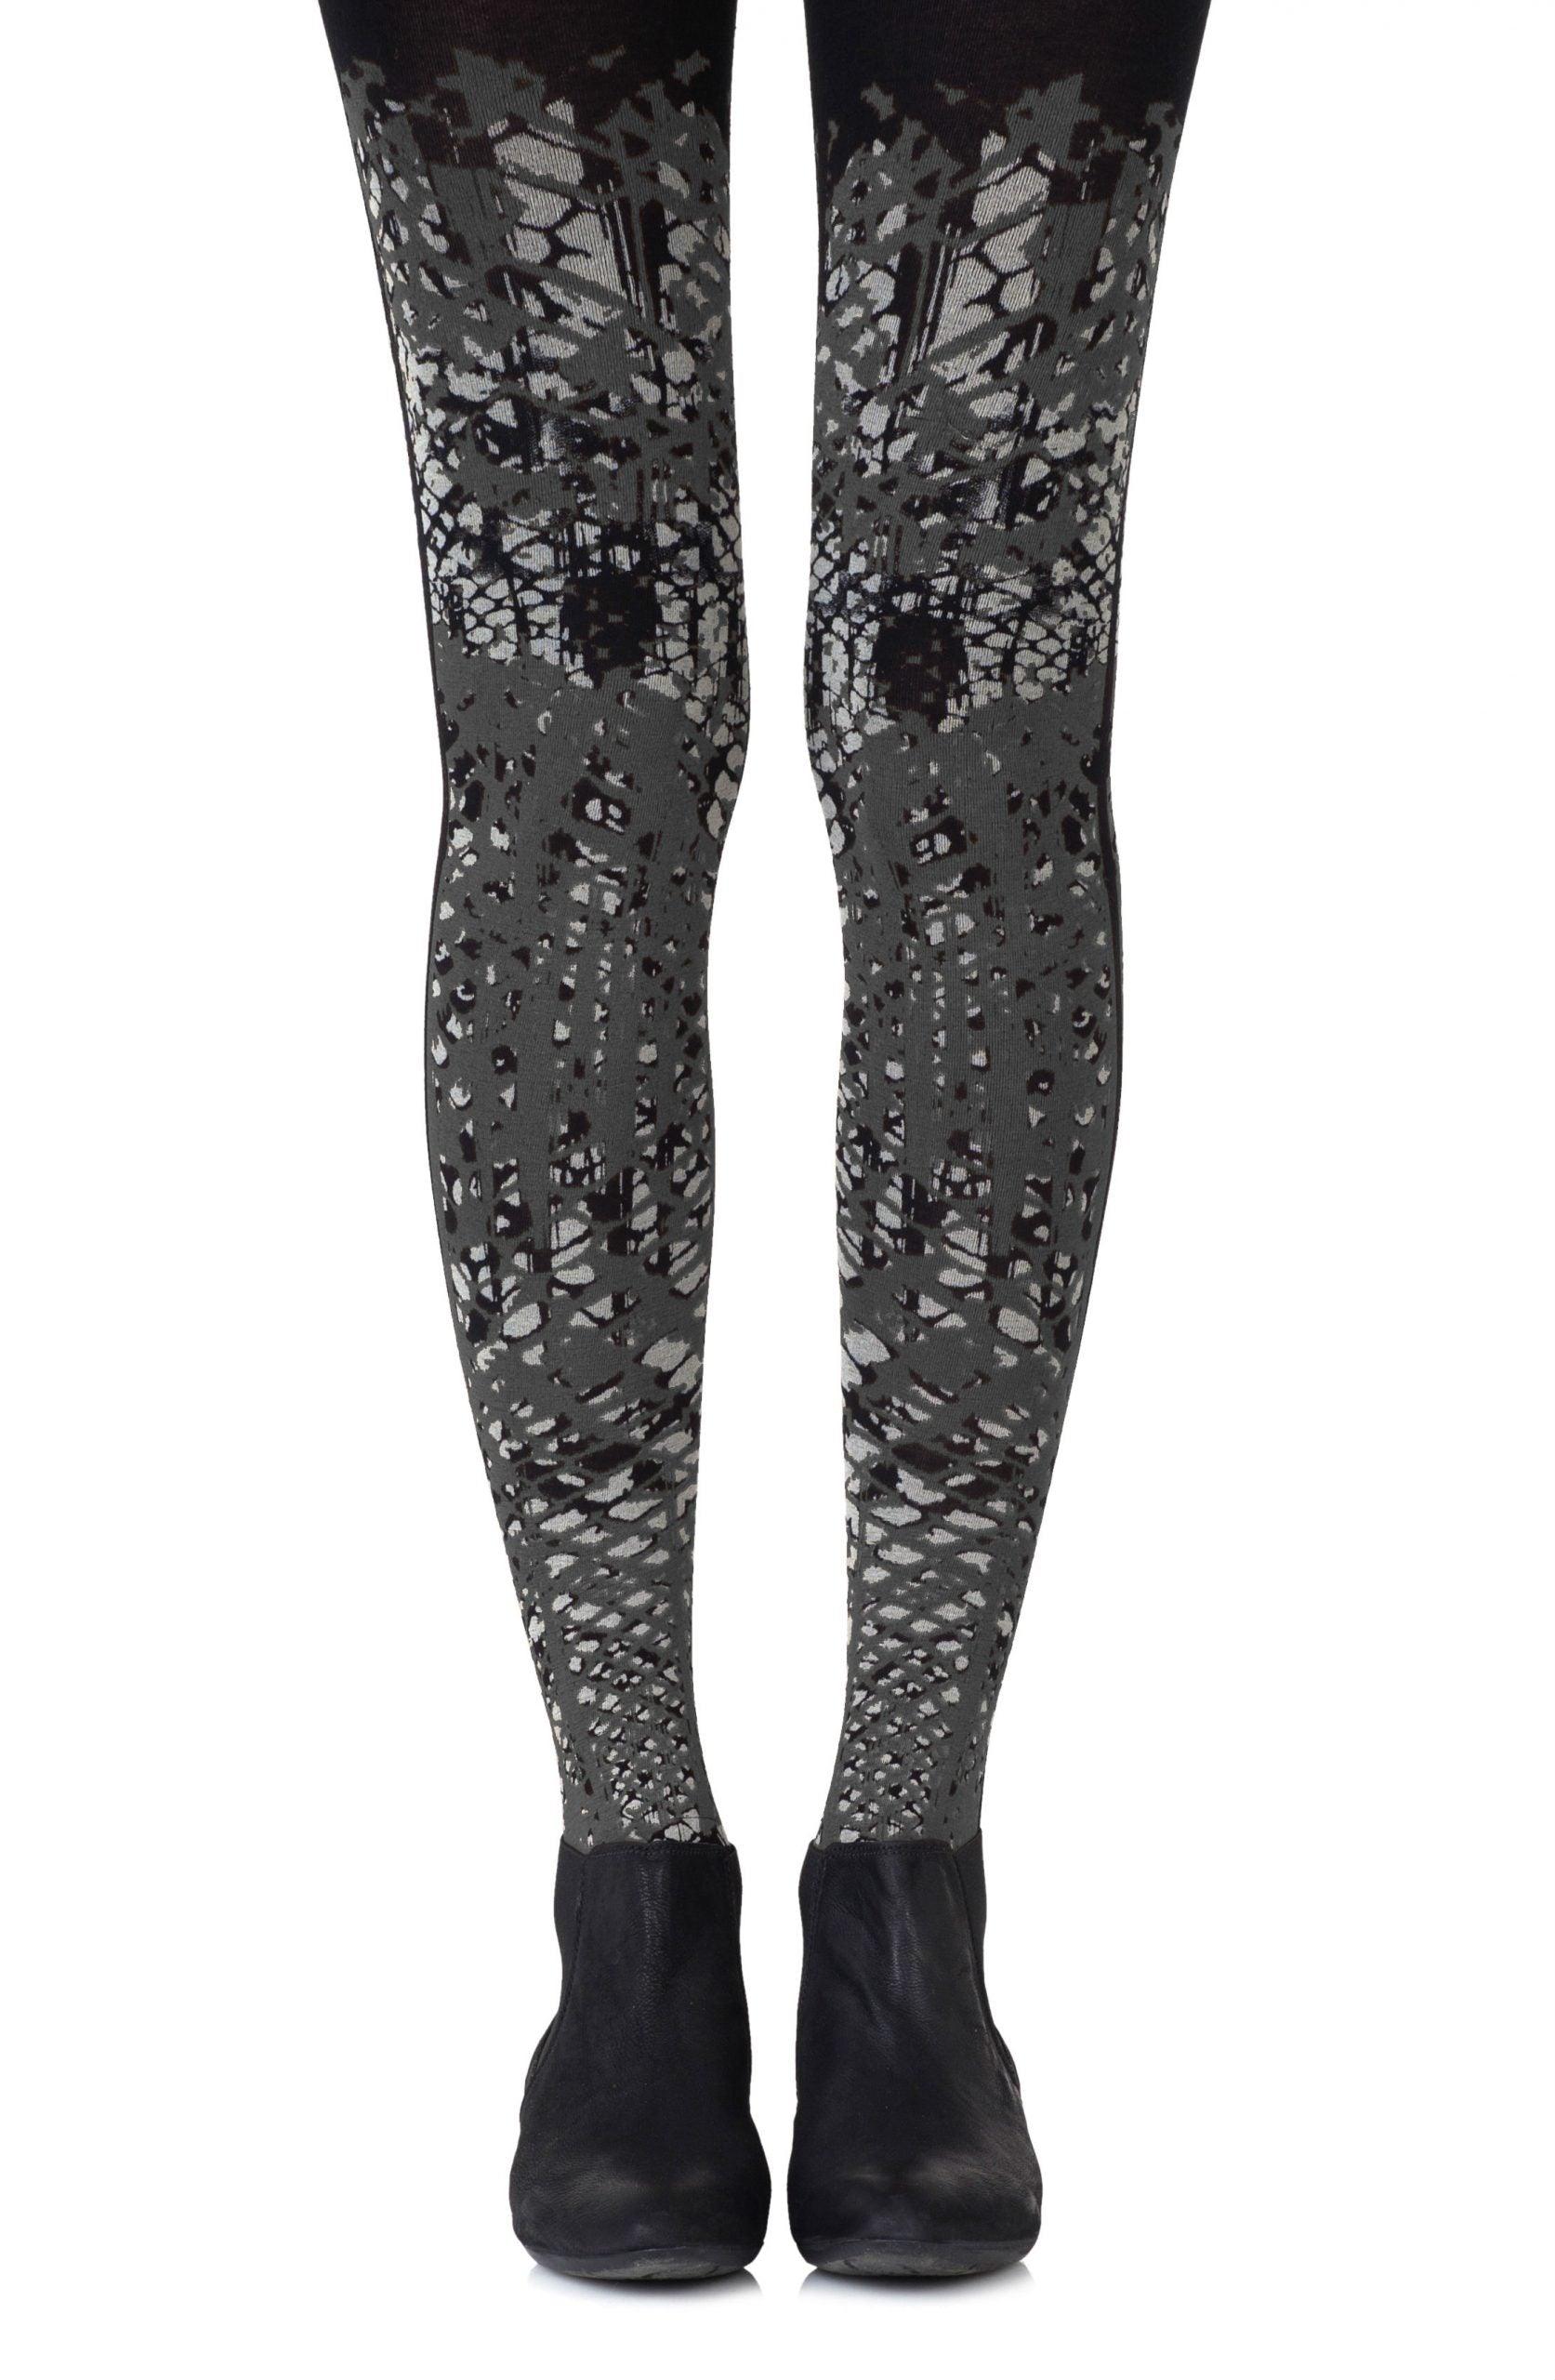 Zohara "Tip The Scale" Light Grey Print Tights - Sydney Rose Lingerie 